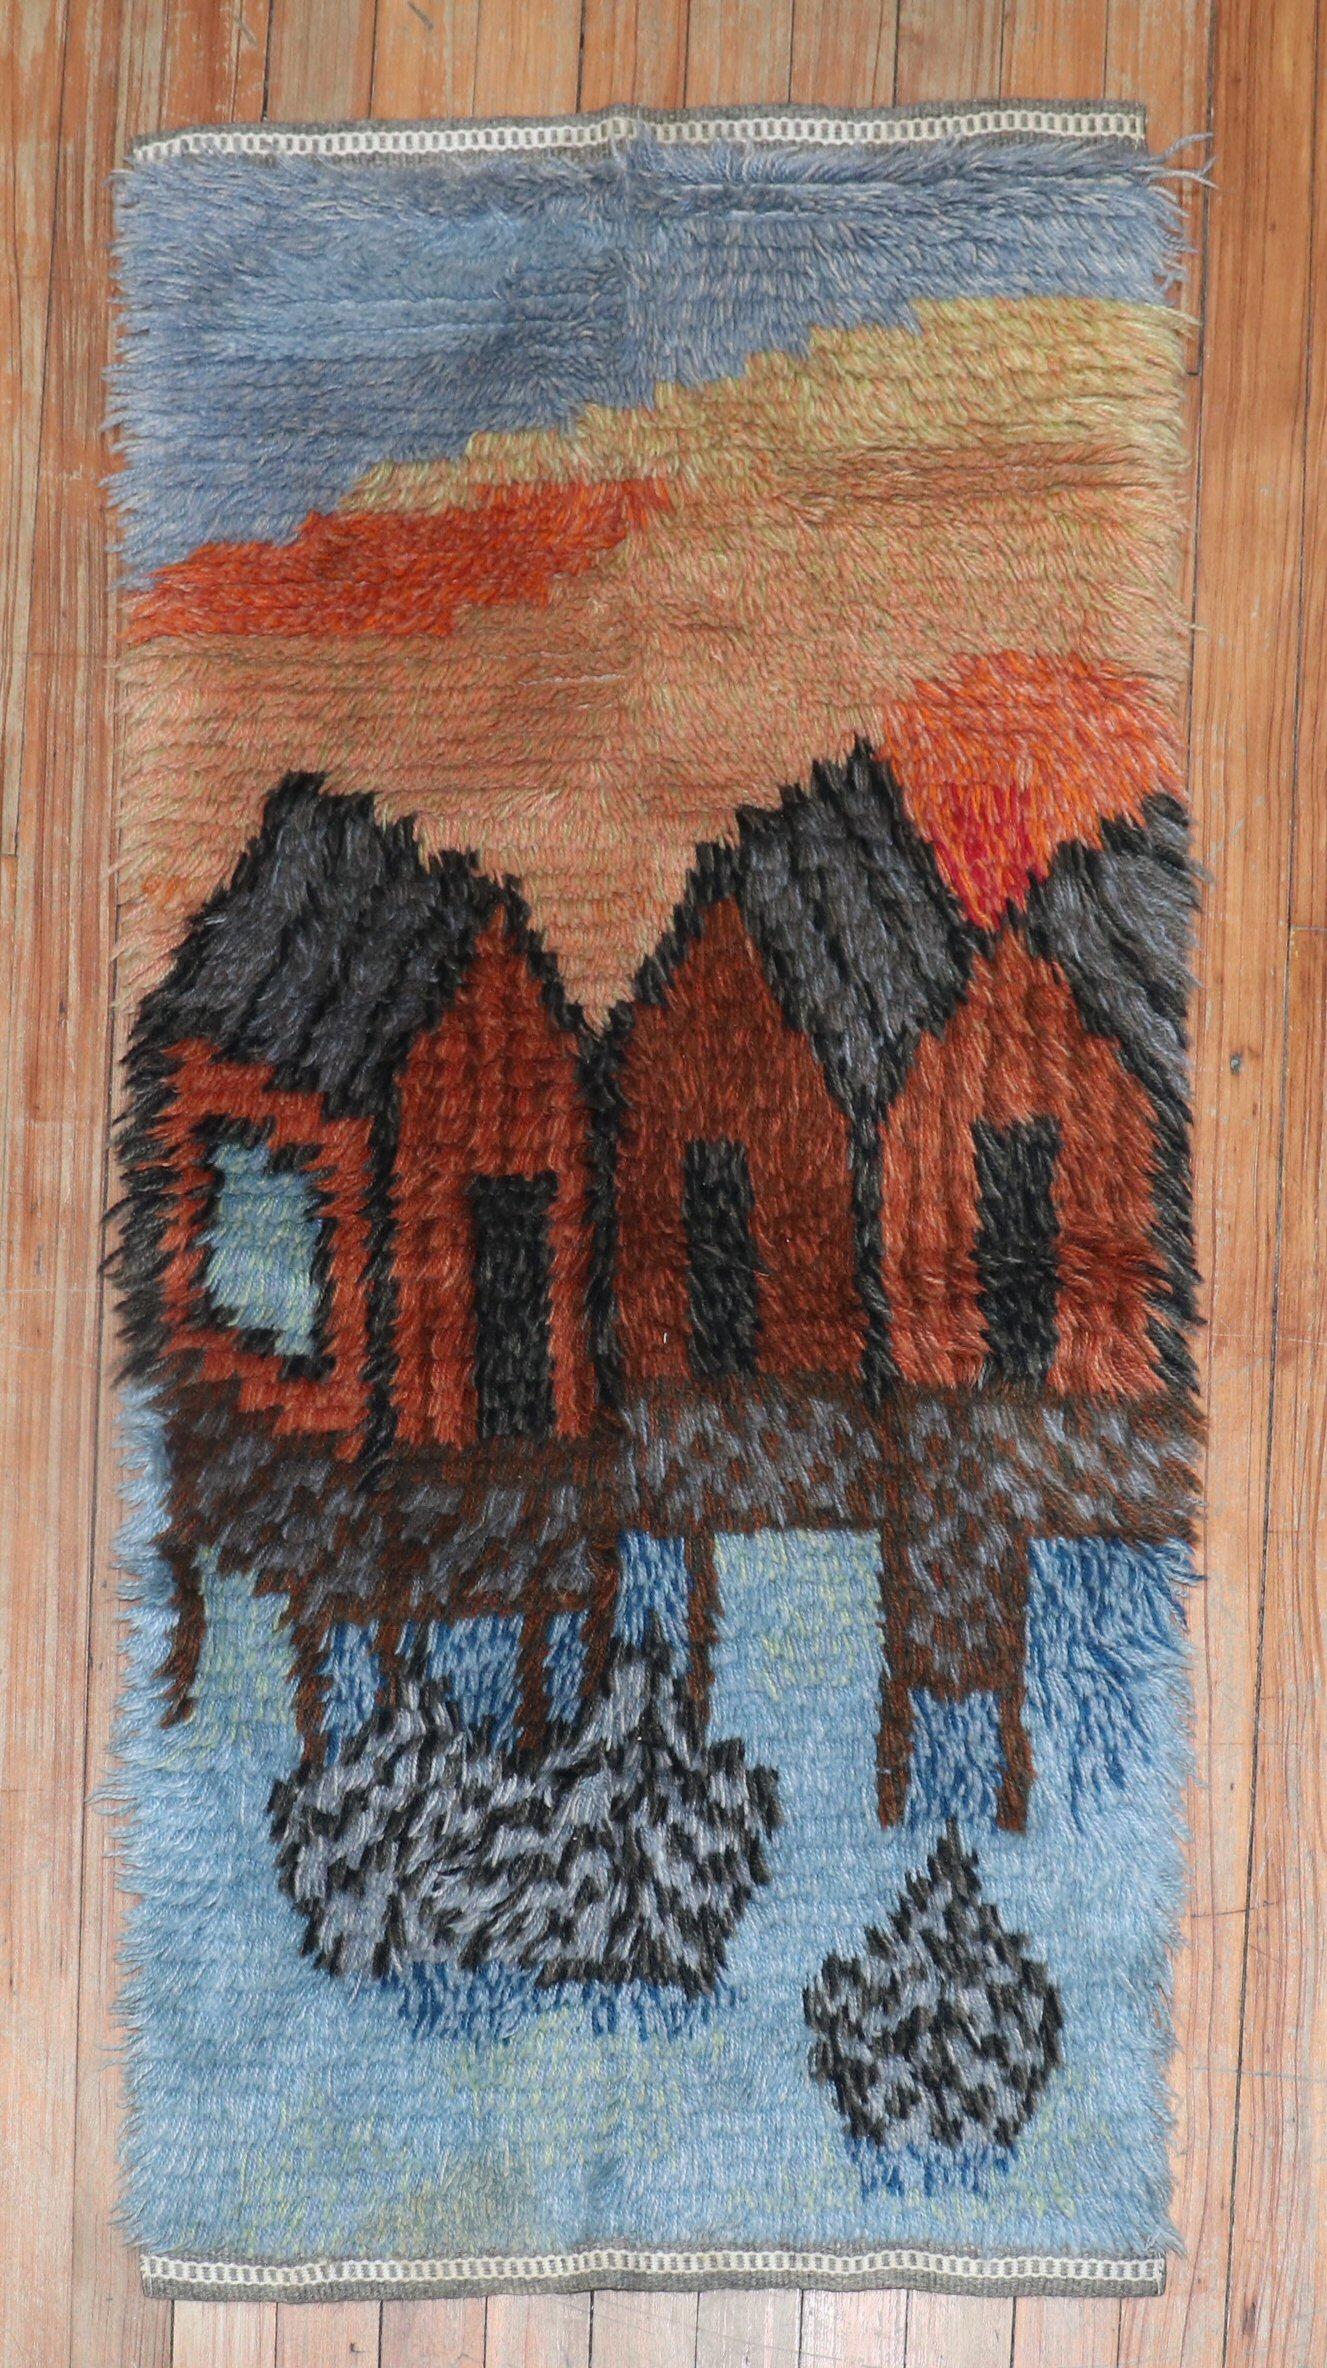 Marvelous small plush Swedish Rya rug from the Mid-20th Century

Measures: 1'10” x 3'9”

Swedish Rya rugs are extremely colorful, lovely and quite chic and each have their own character to them. They tend to have thicker shaggy piles which were